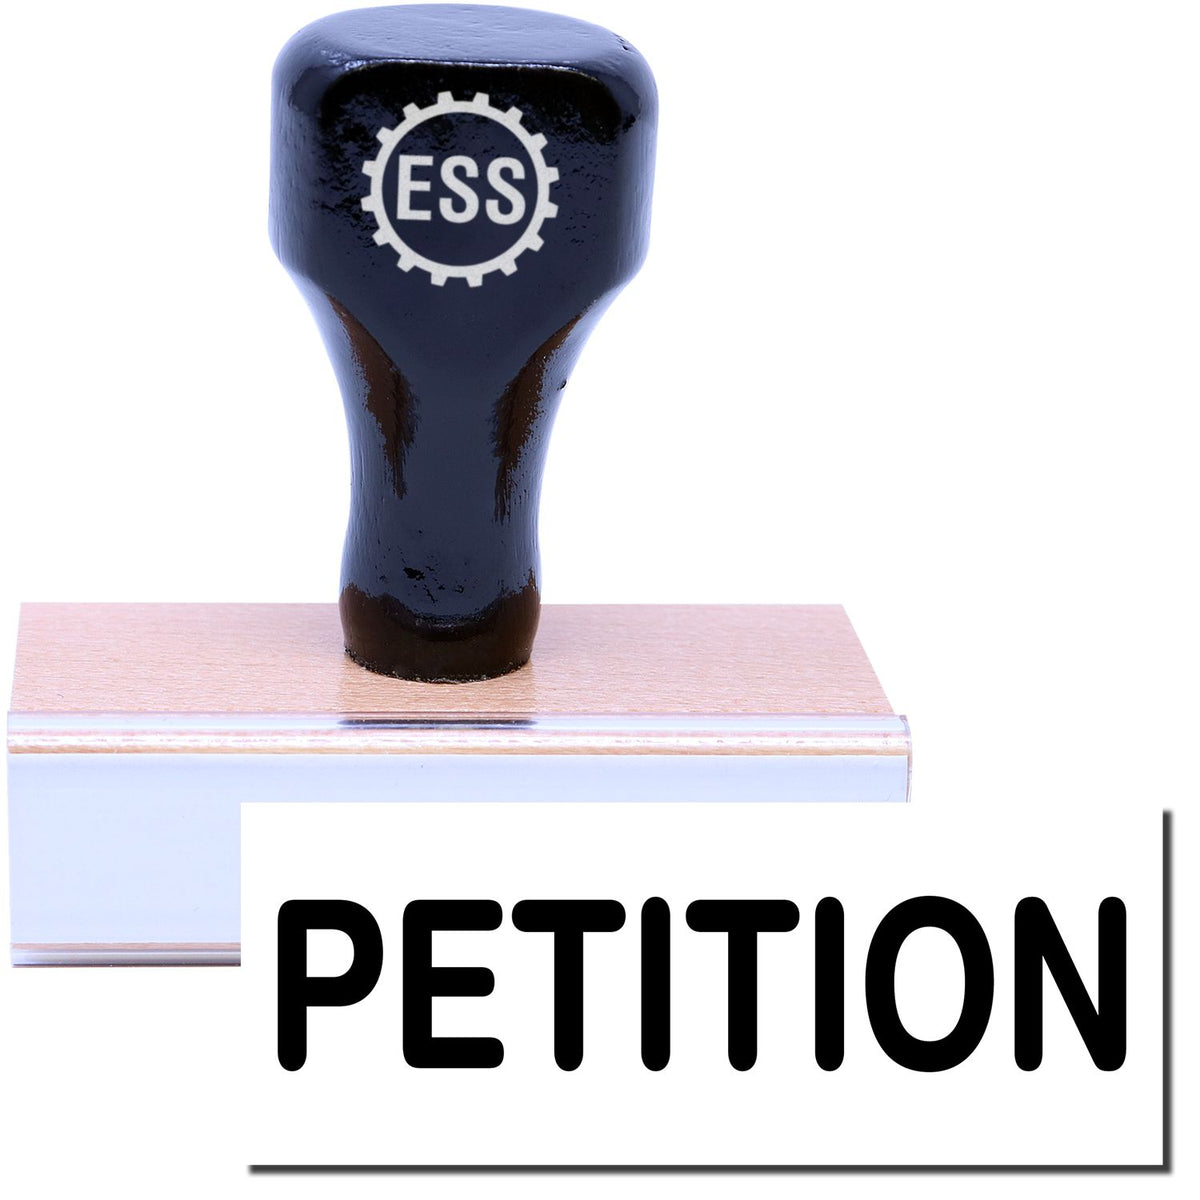 A stock office rubber stamp with a stamped image showing how the text &quot;PETITION&quot; in a large font is displayed after stamping.